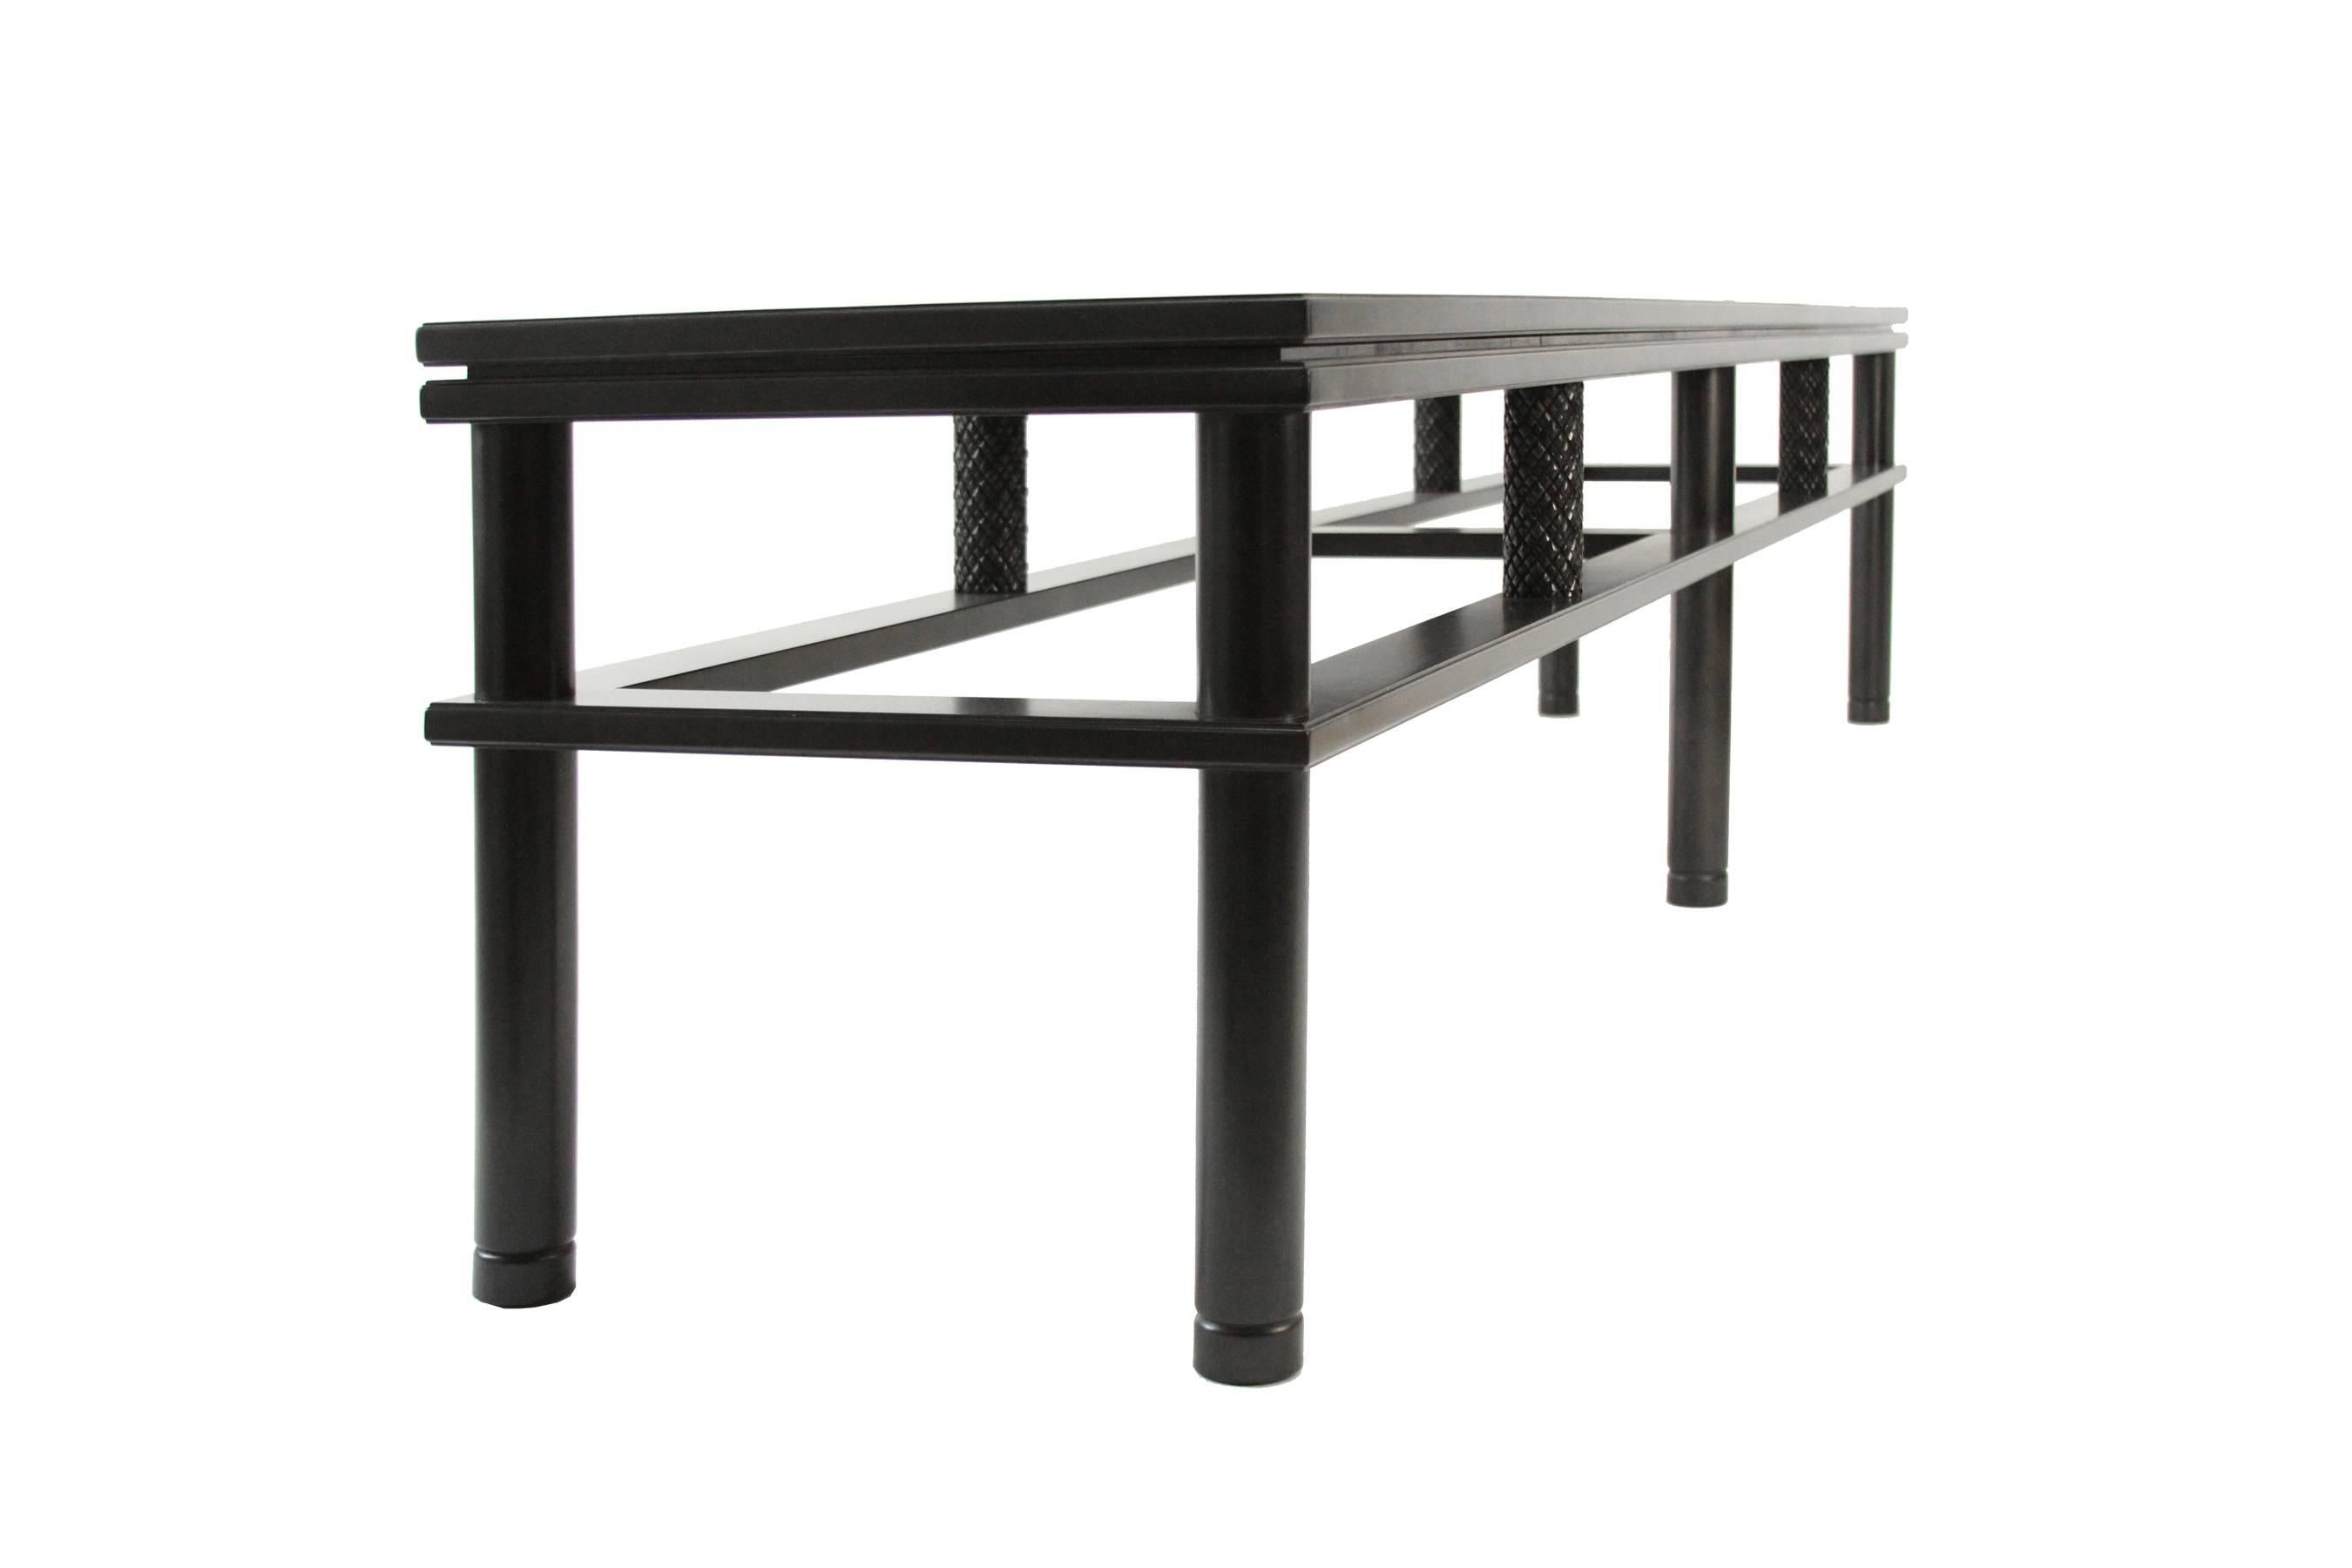 Designed in 2016, the Olneyville console or media table is perfect as a long entry surface. Can also be used as a bench, behind a sofa, or as a media console. Ebony stain is black. Solid maple hardwood. Measures: 108